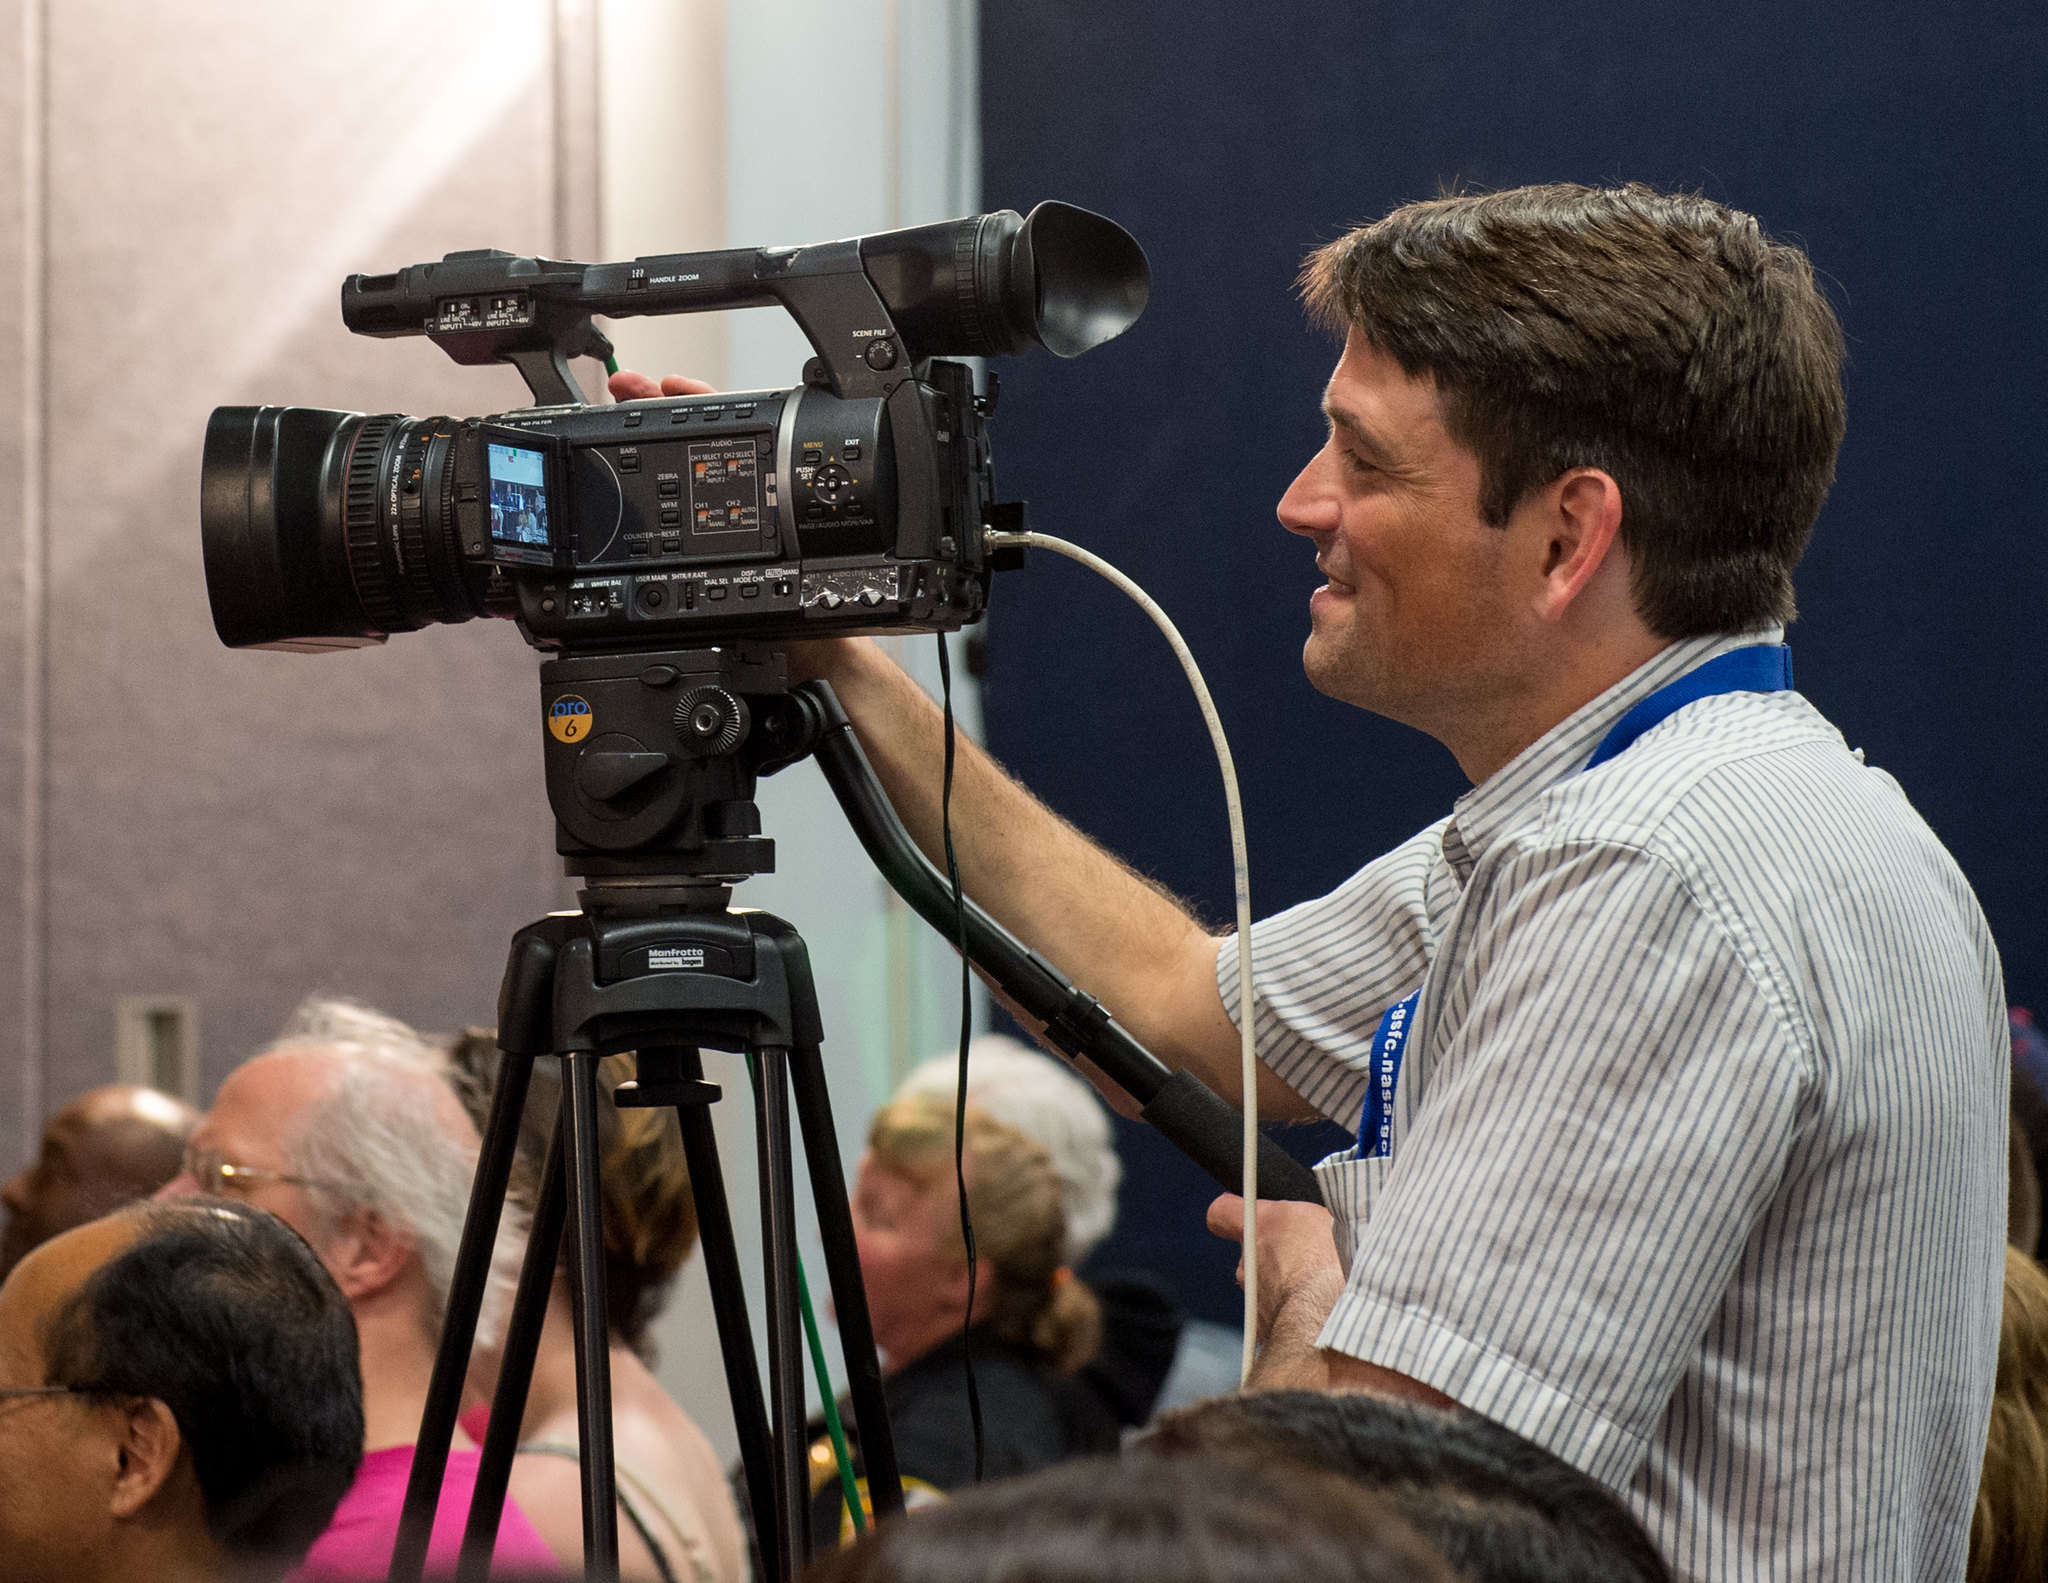 A man smiles while standing behind a video camera.